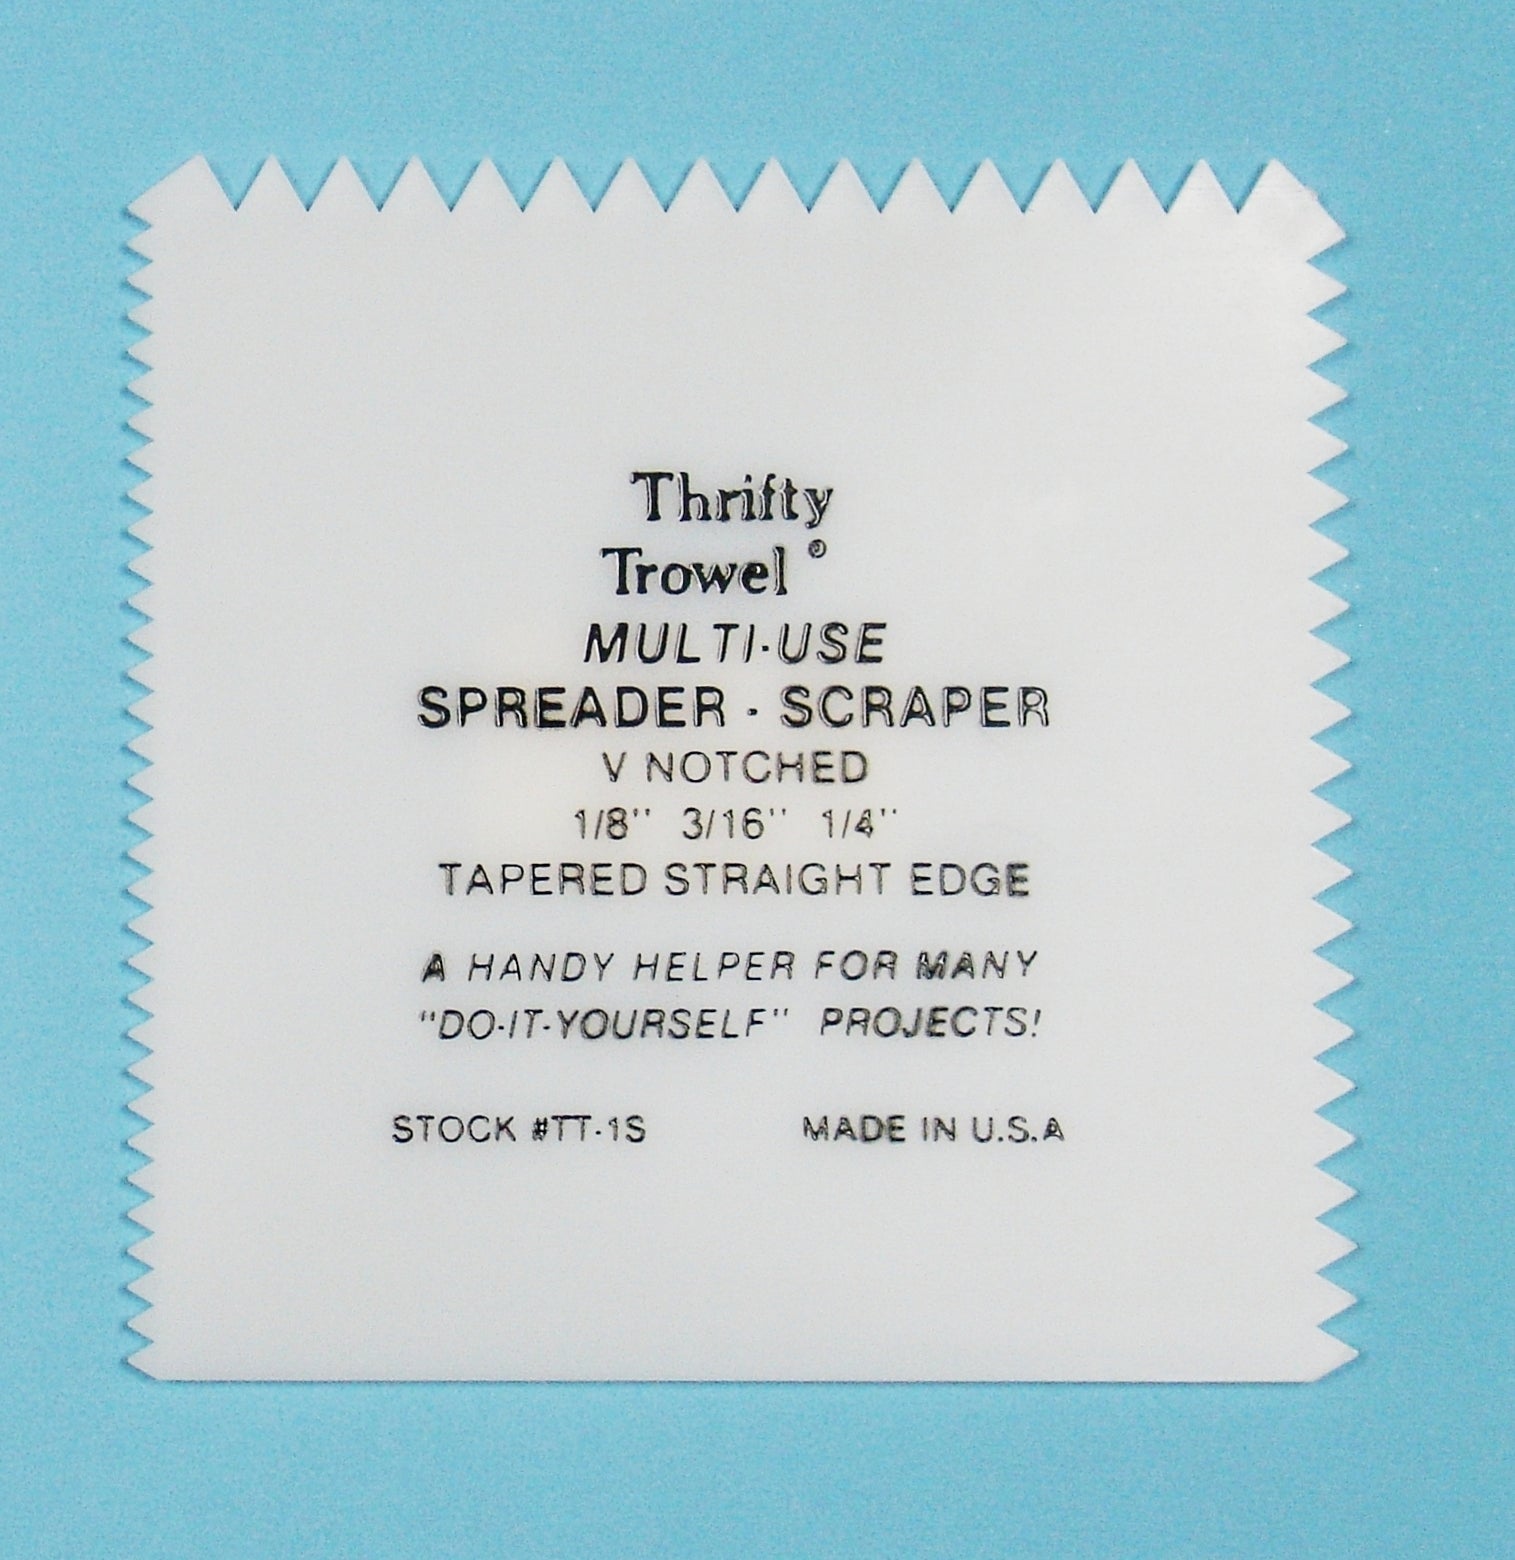 THRIFTY TROWEL MULTI-USE SPREADER-SCRAPER LOT OF 5 V NOTCHED 